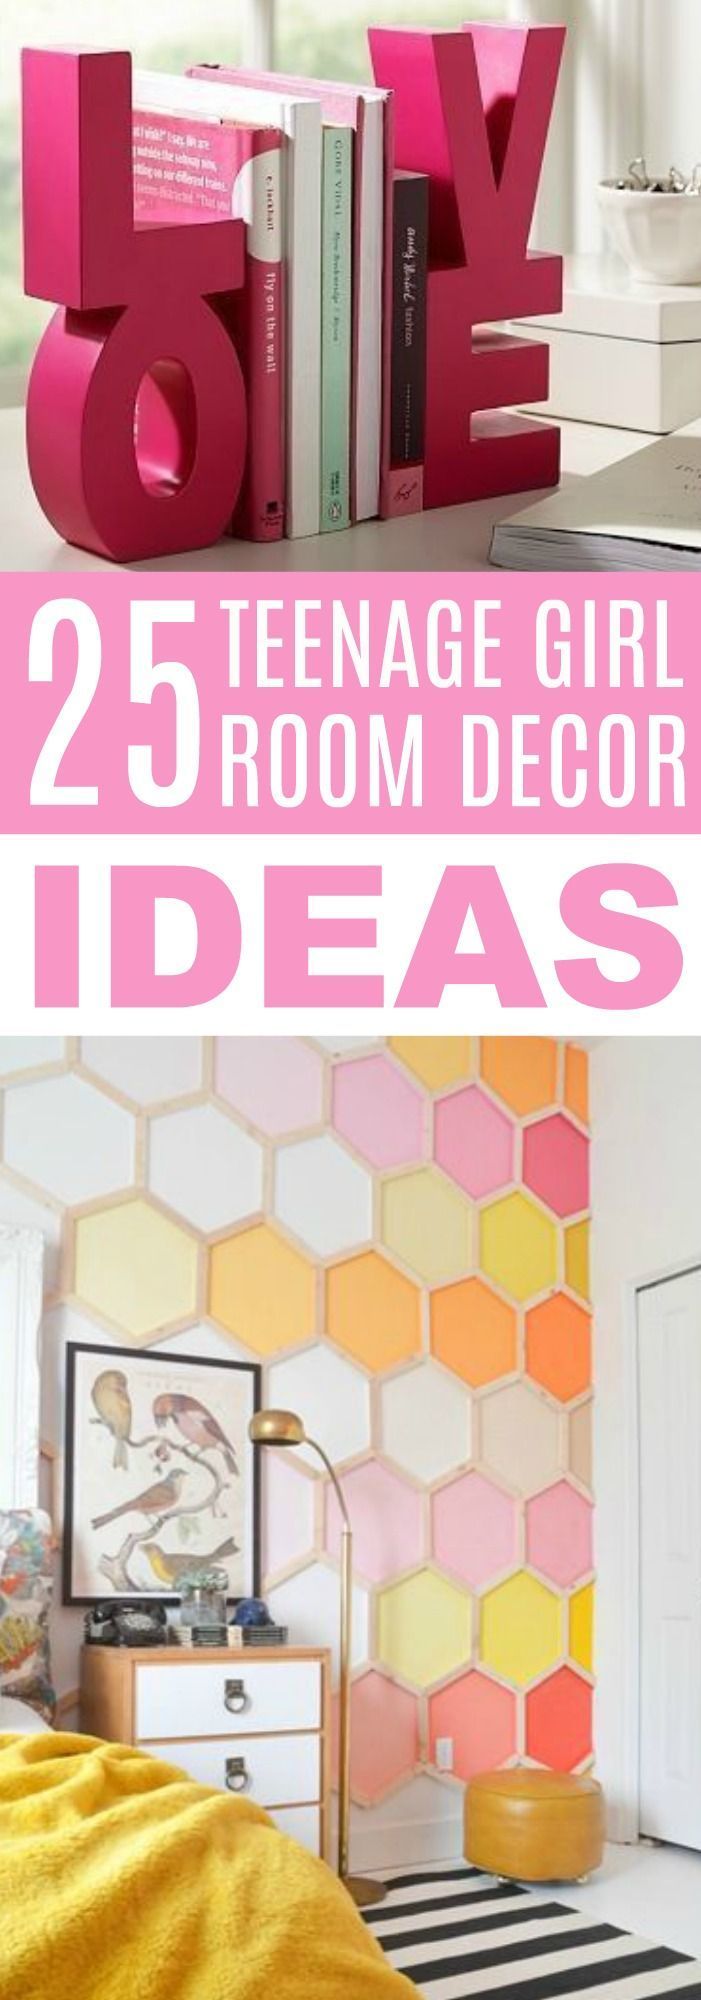 25 Teenage Girl Room Decor Ideas - A Little Craft In Your Day -   23 room decor diy for girls crafts ideas